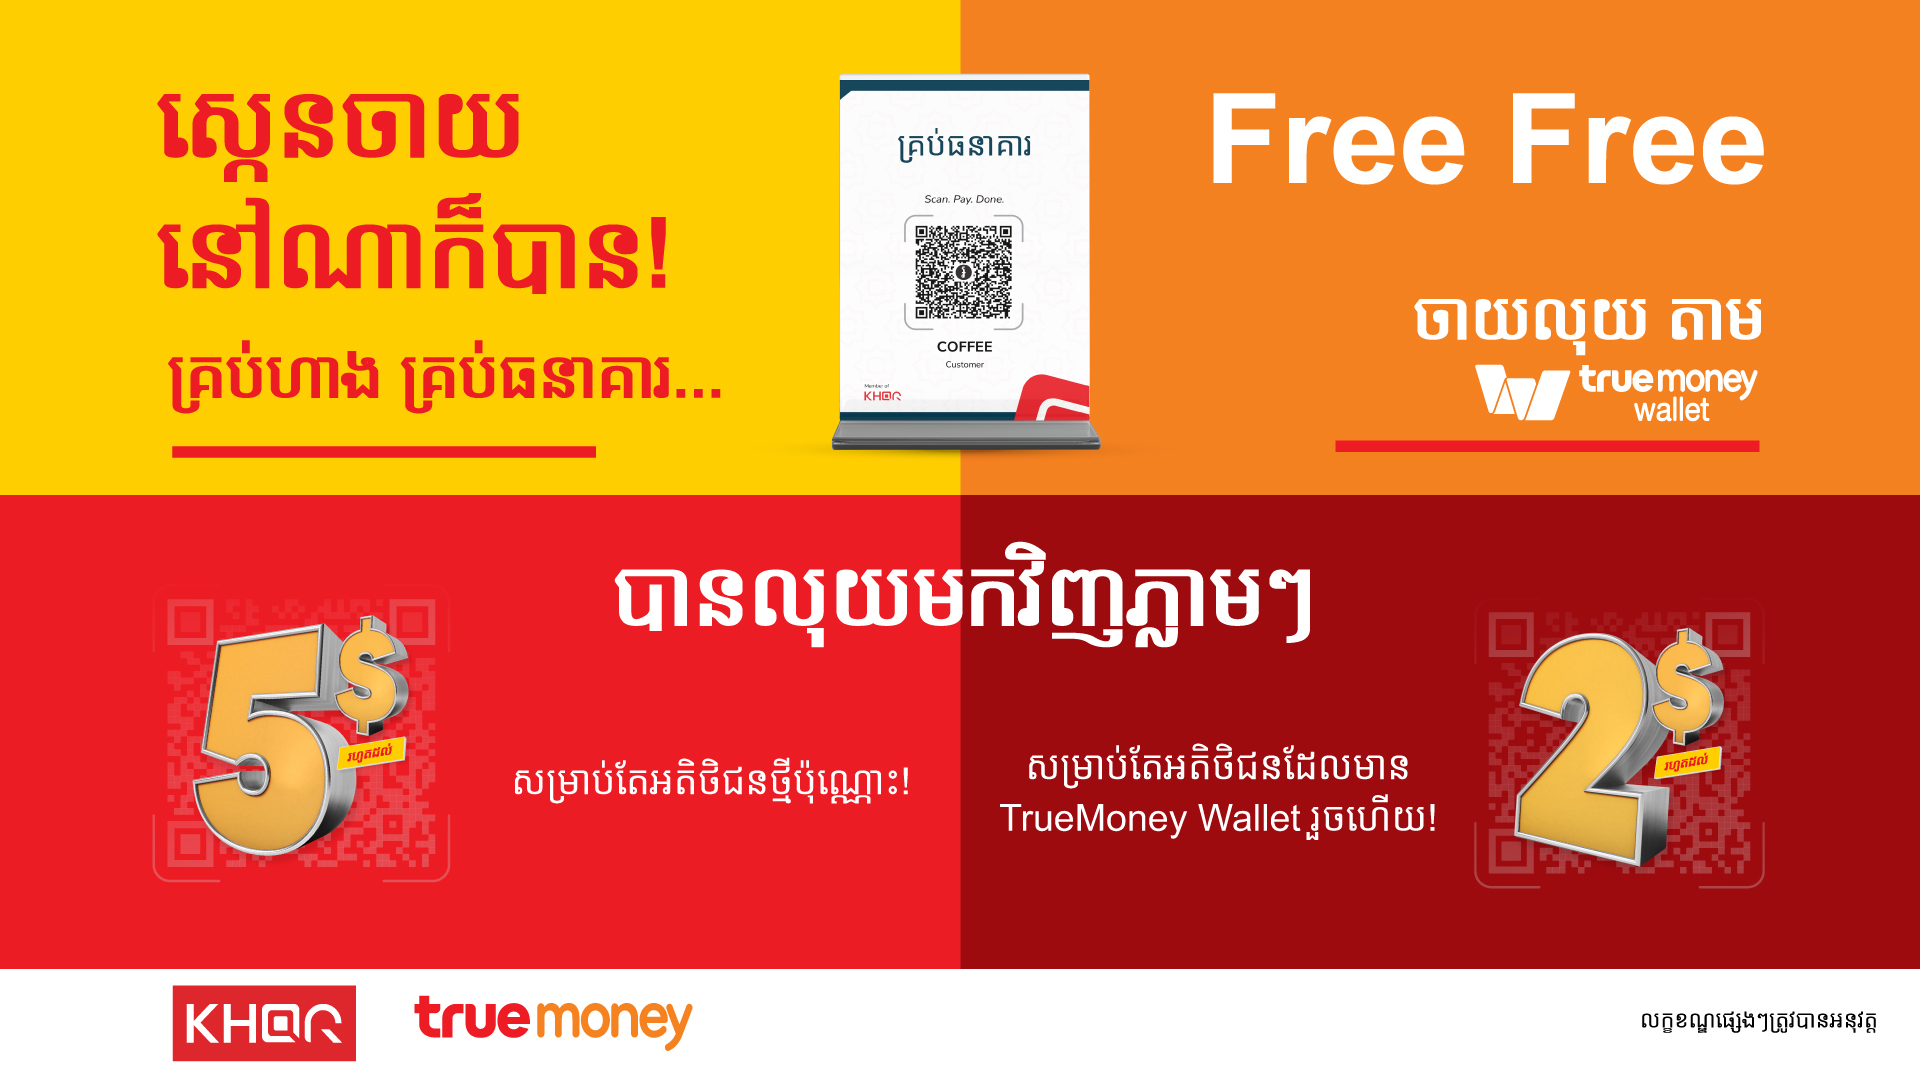 TrueMoney Wallet supports and promotes KHQR with cashback offers up to $5